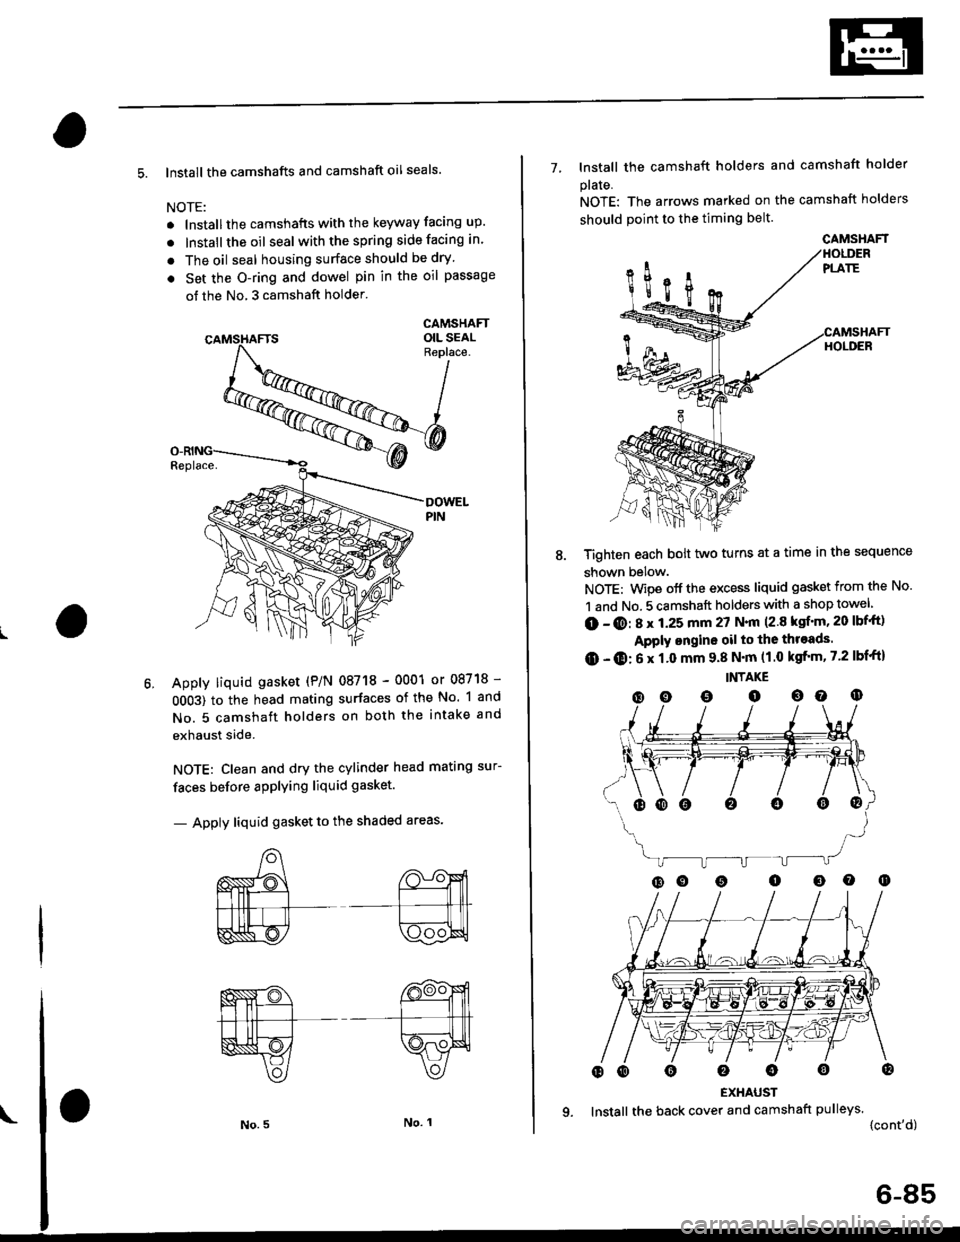 HONDA CIVIC 1998 6.G Workshop Manual 5. lnstall the camshafts and camshaft oil seals.
NOTE:
. lnstallthe camshafts with the keyway facing up.
. lnstall the oil seal withthespring side facing in.
. The oil seal housing surface should be d